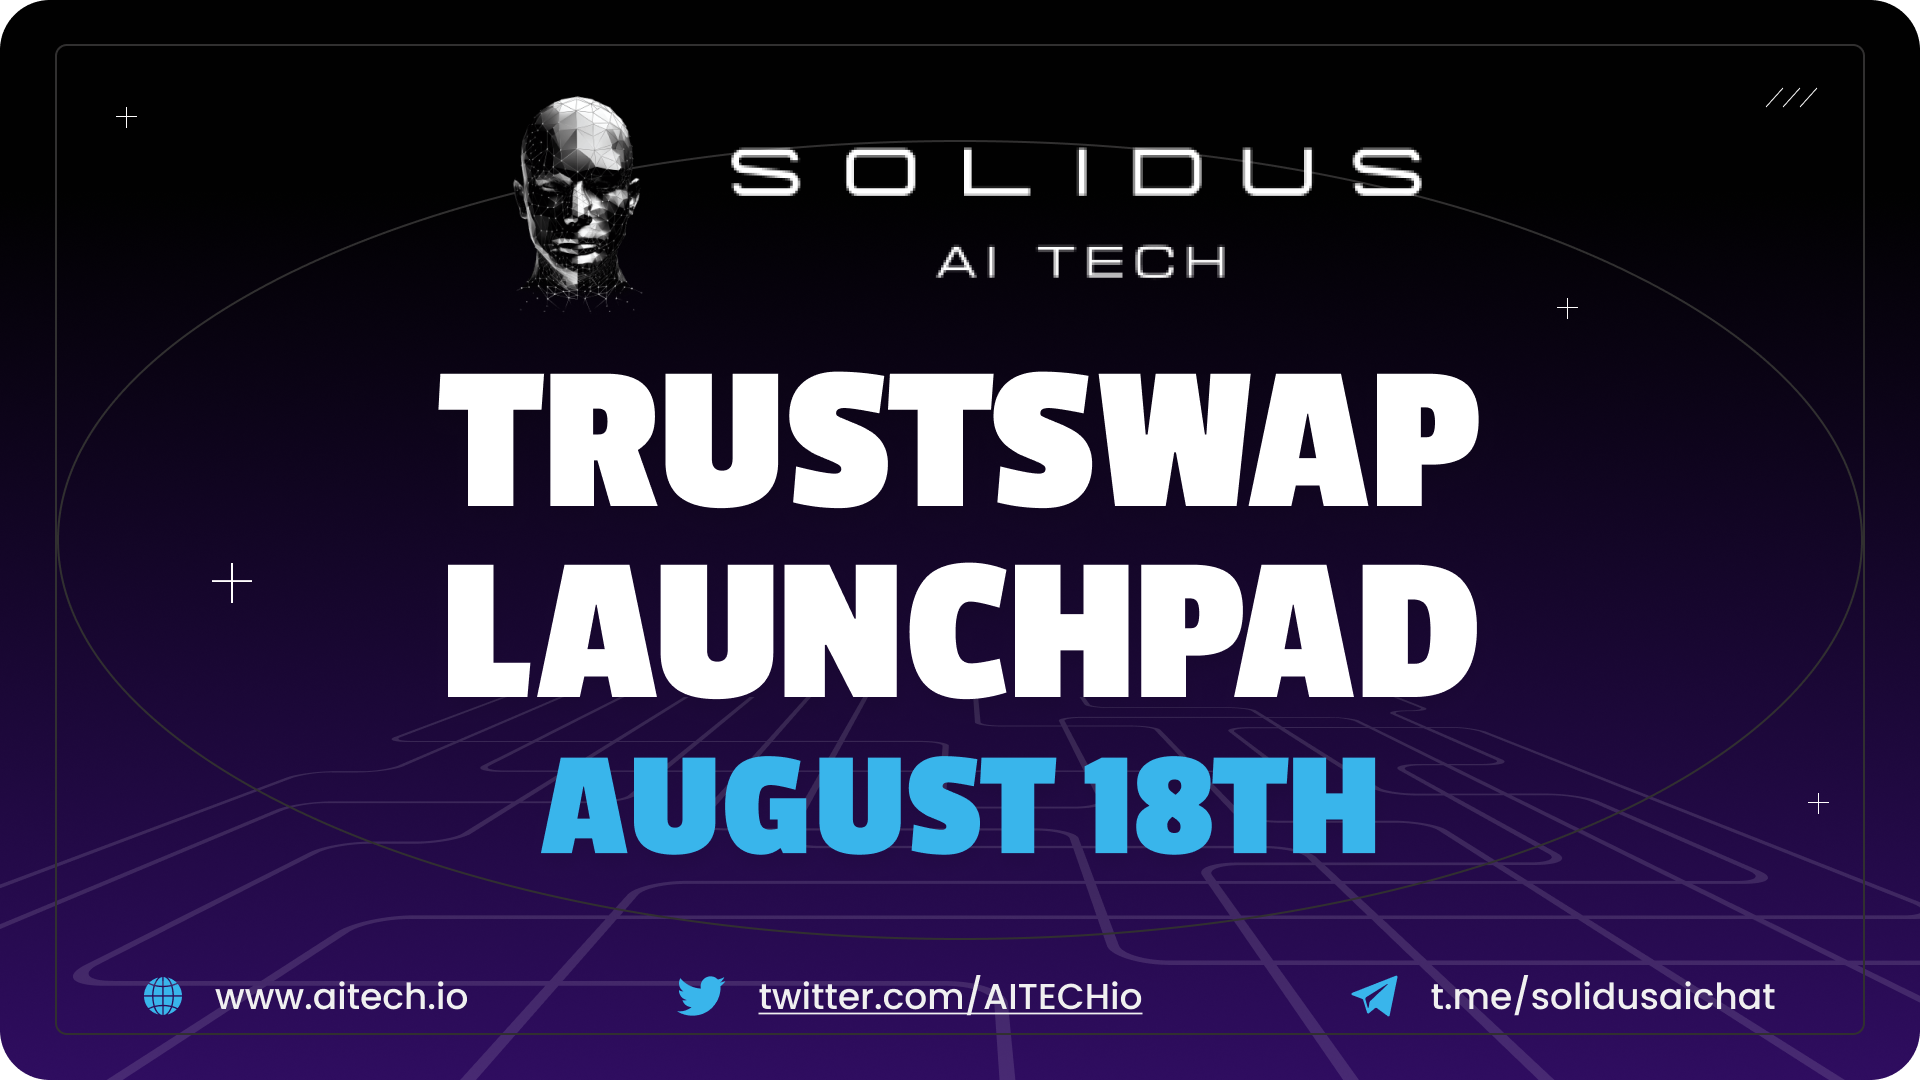 SOLIDUS AI TECH Announces August 18th Token Offering on TrustSwap Launchpad